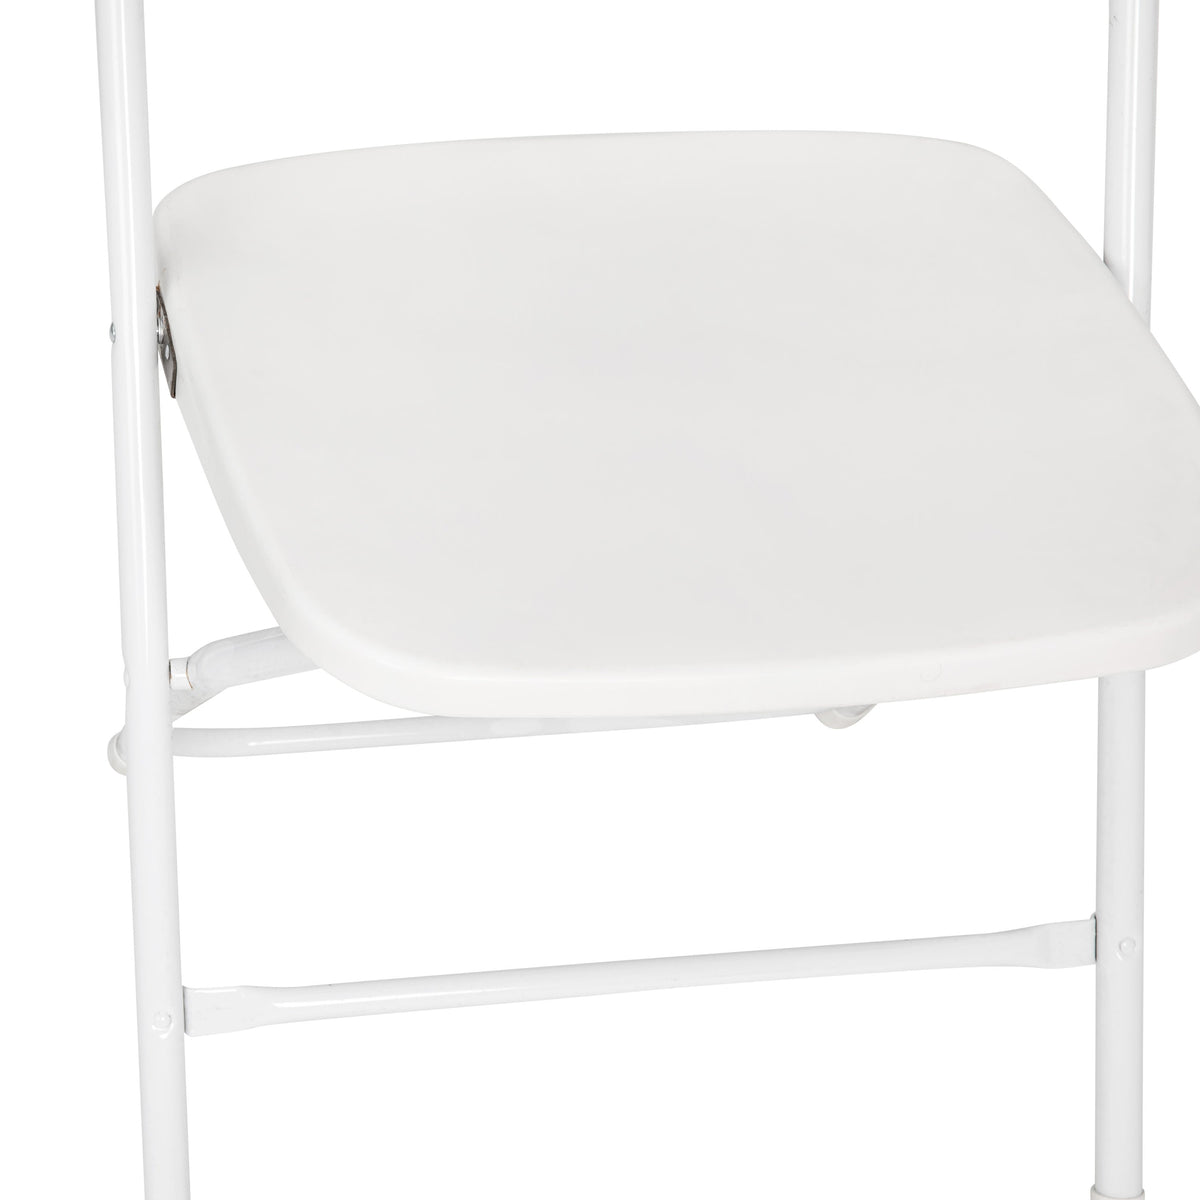 White |#| Spacious & Contoured Commercial Wide & Tall White Plastic Folding Chairs-4 Pack